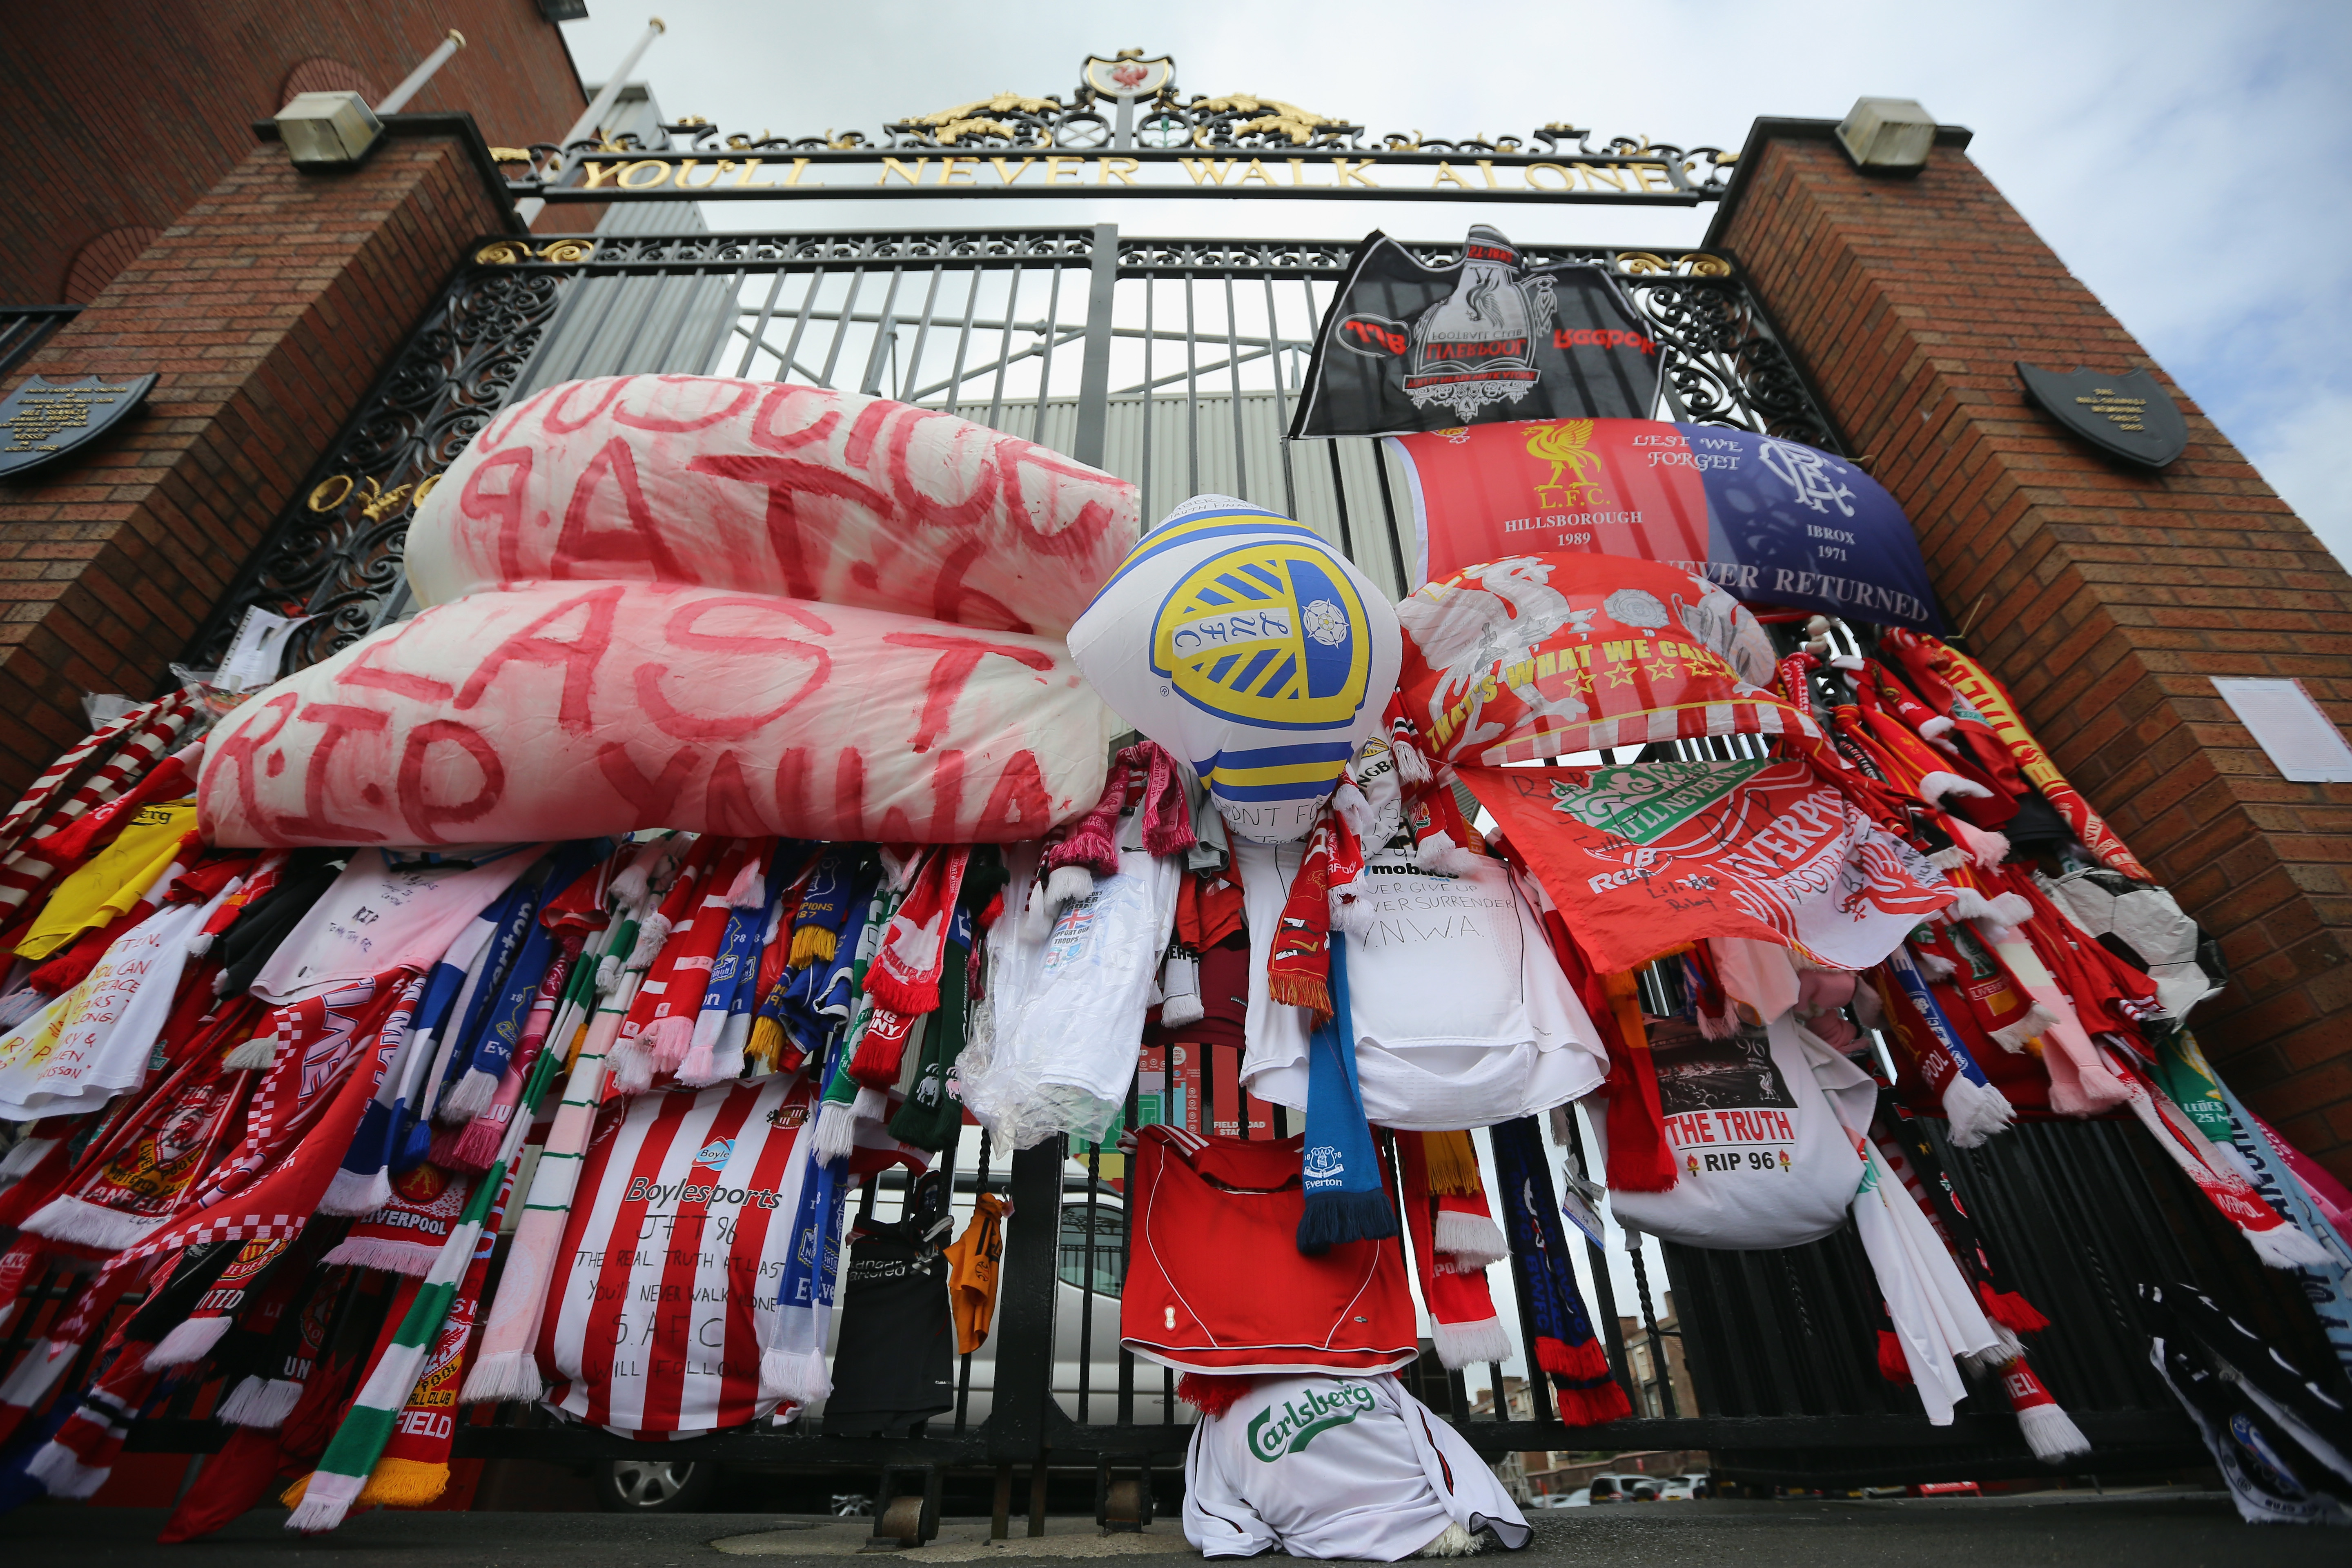 Relatives Of The Hillsborough Disaster Victims Want New Inquests Held In Liverpool